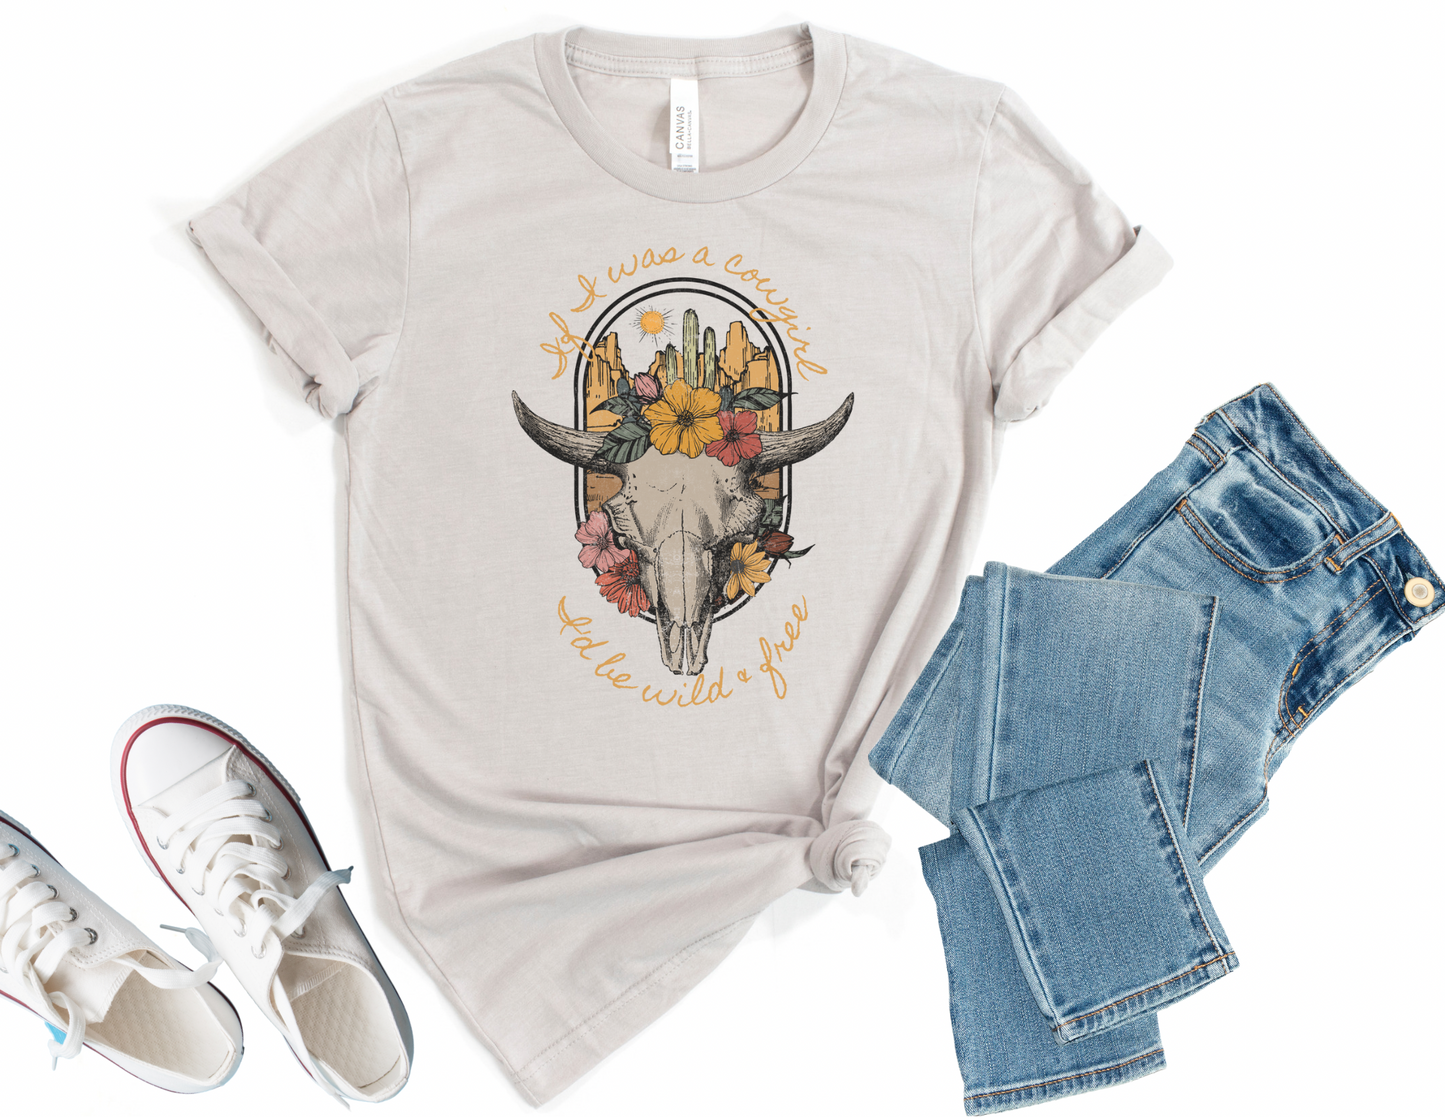 If I Was A Cowgirl I’d Be Wild & Free Shirt